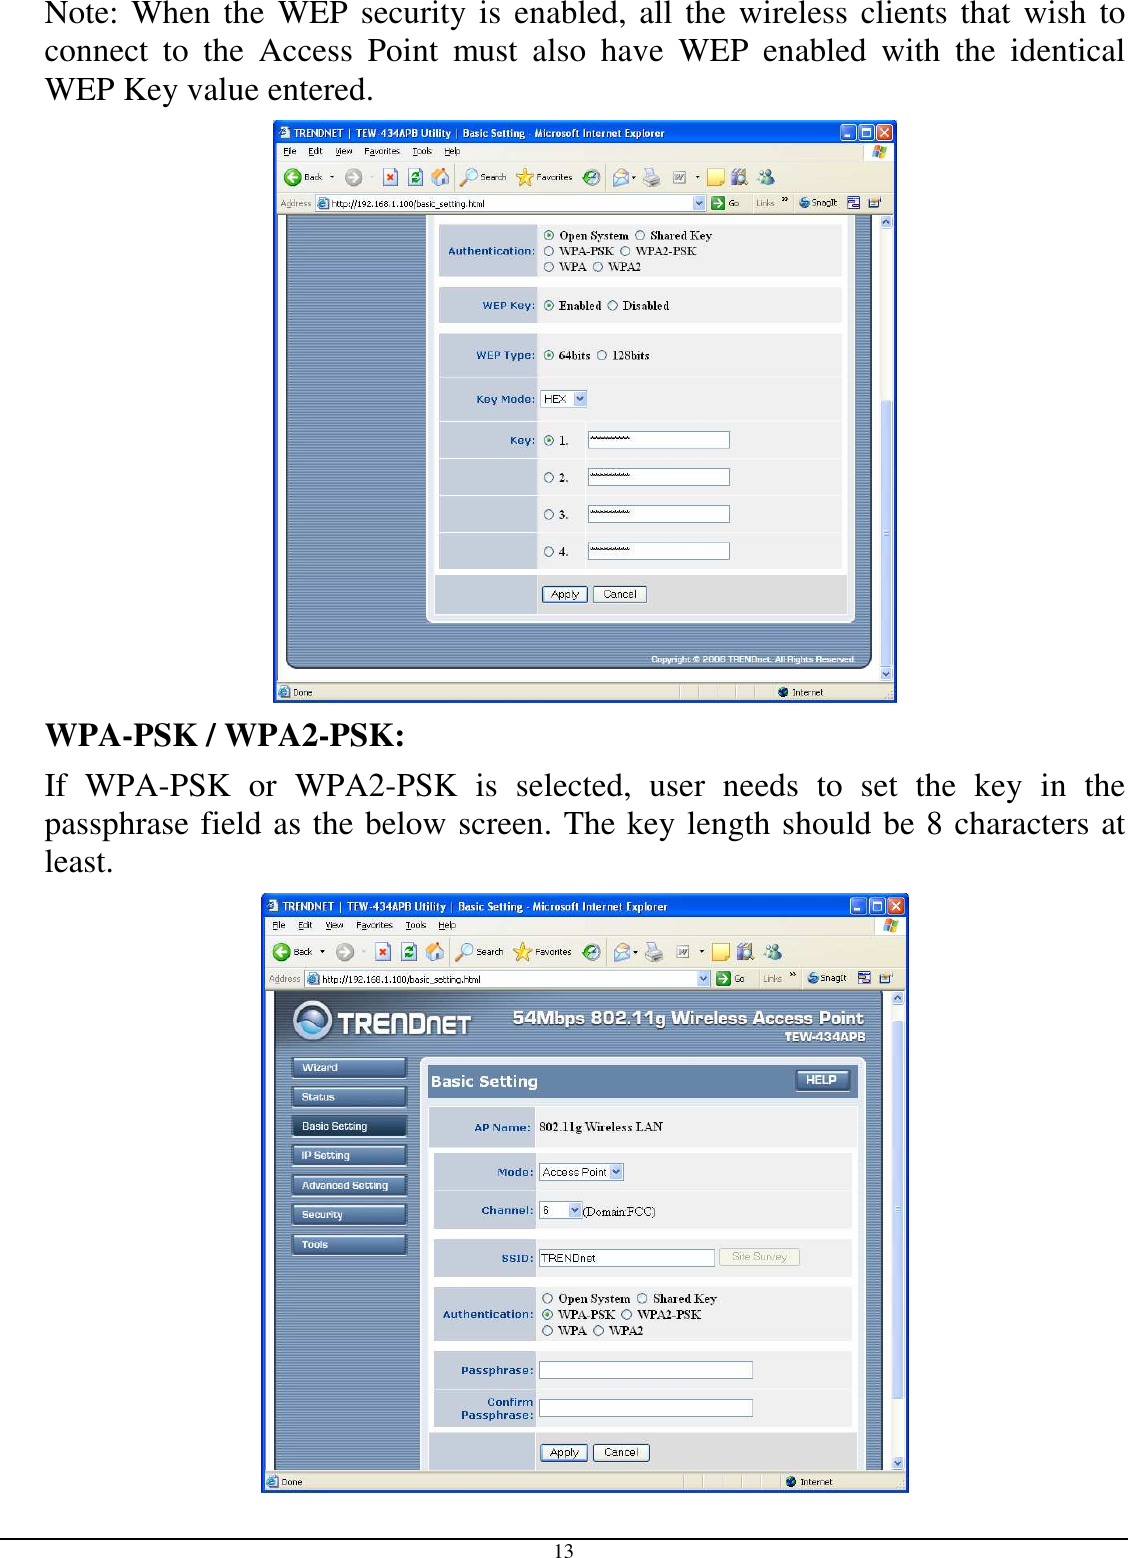  13 Note: When the WEP security is enabled, all the wireless clients that wish to connect  to  the  Access  Point  must  also  have  WEP  enabled  with  the  identical WEP Key value entered.  WPA-PSK / WPA2-PSK:    If  WPA-PSK  or  WPA2-PSK  is  selected,  user  needs  to  set  the  key  in  the passphrase field as the below screen. The key length should be 8 characters at least.  